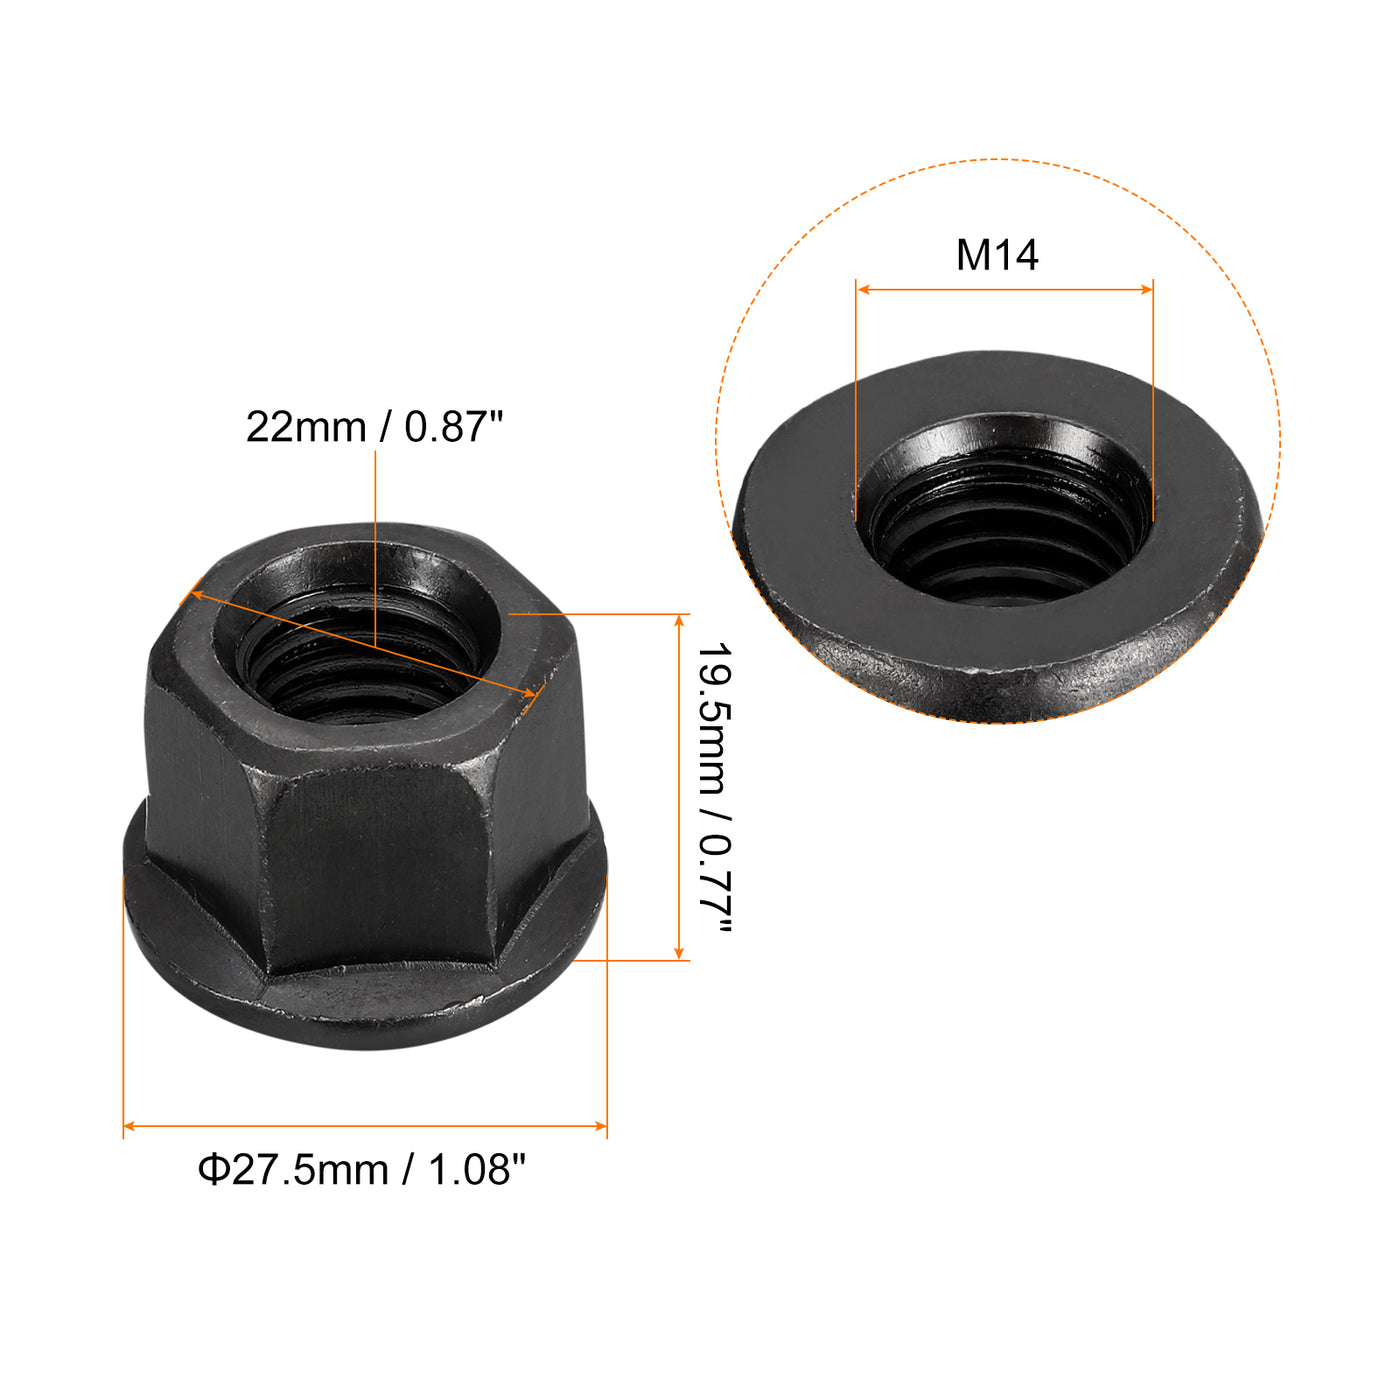 uxcell Uxcell M14 Flange Hex Lock Nuts, 2pcs Grade 10.9 Carbon Steel Hex Flange Nuts